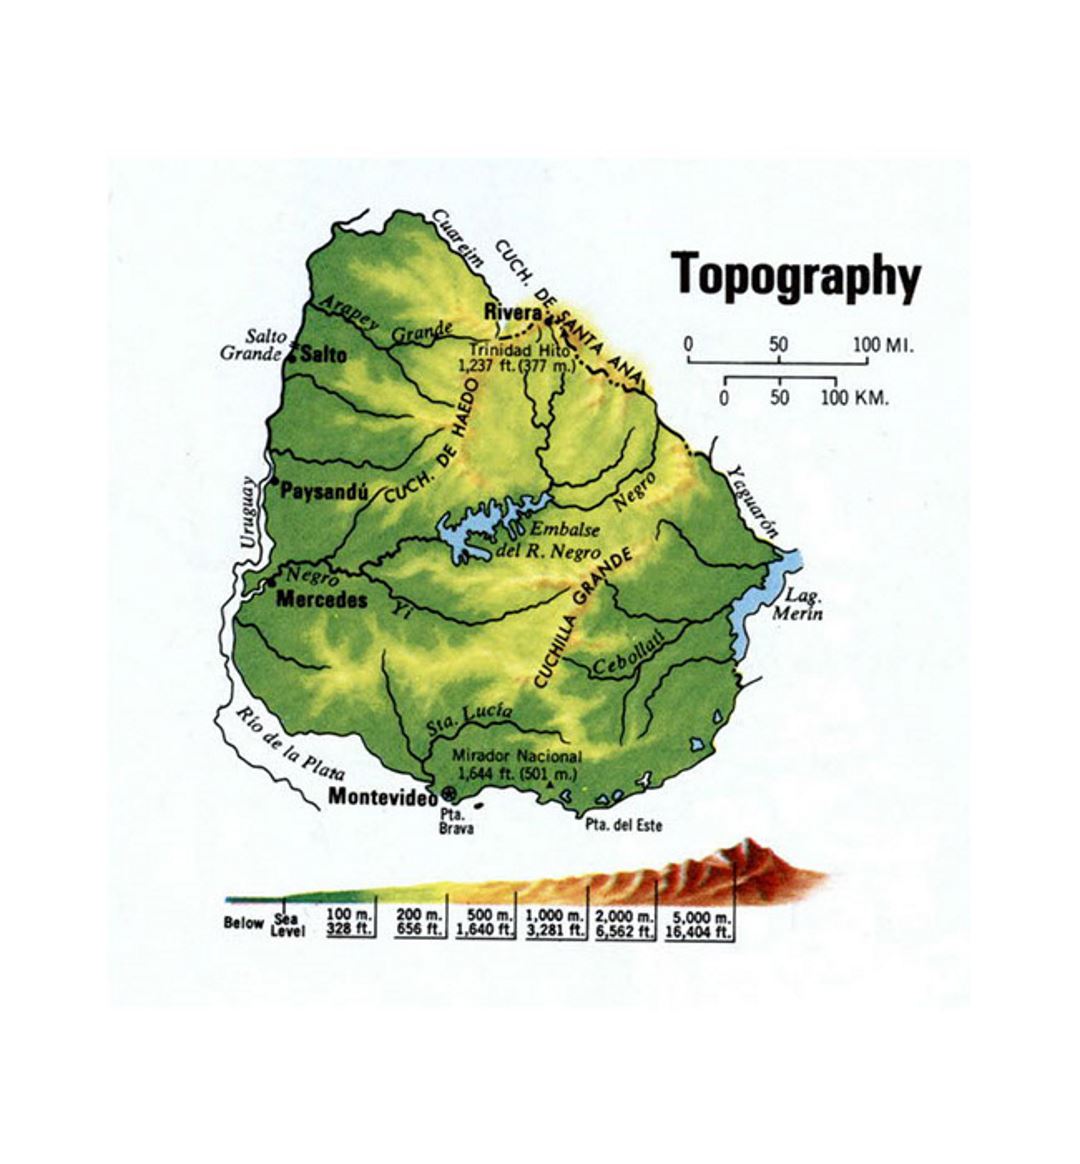 Detailed topography map of Uruguay